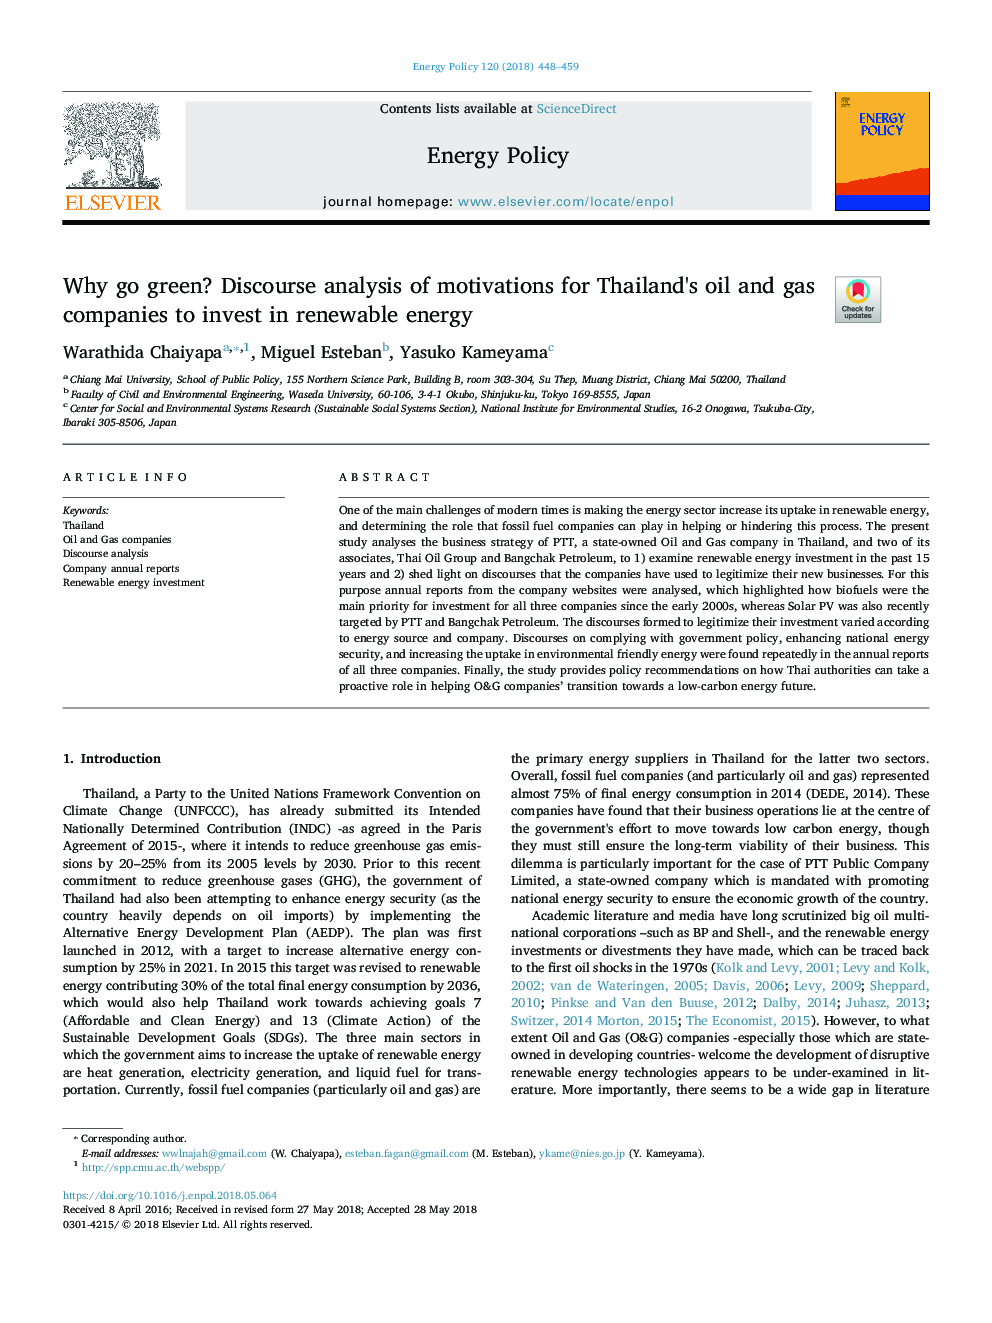 Why go green? Discourse analysis of motivations for Thailand's oil and gas companies to invest in renewable energy